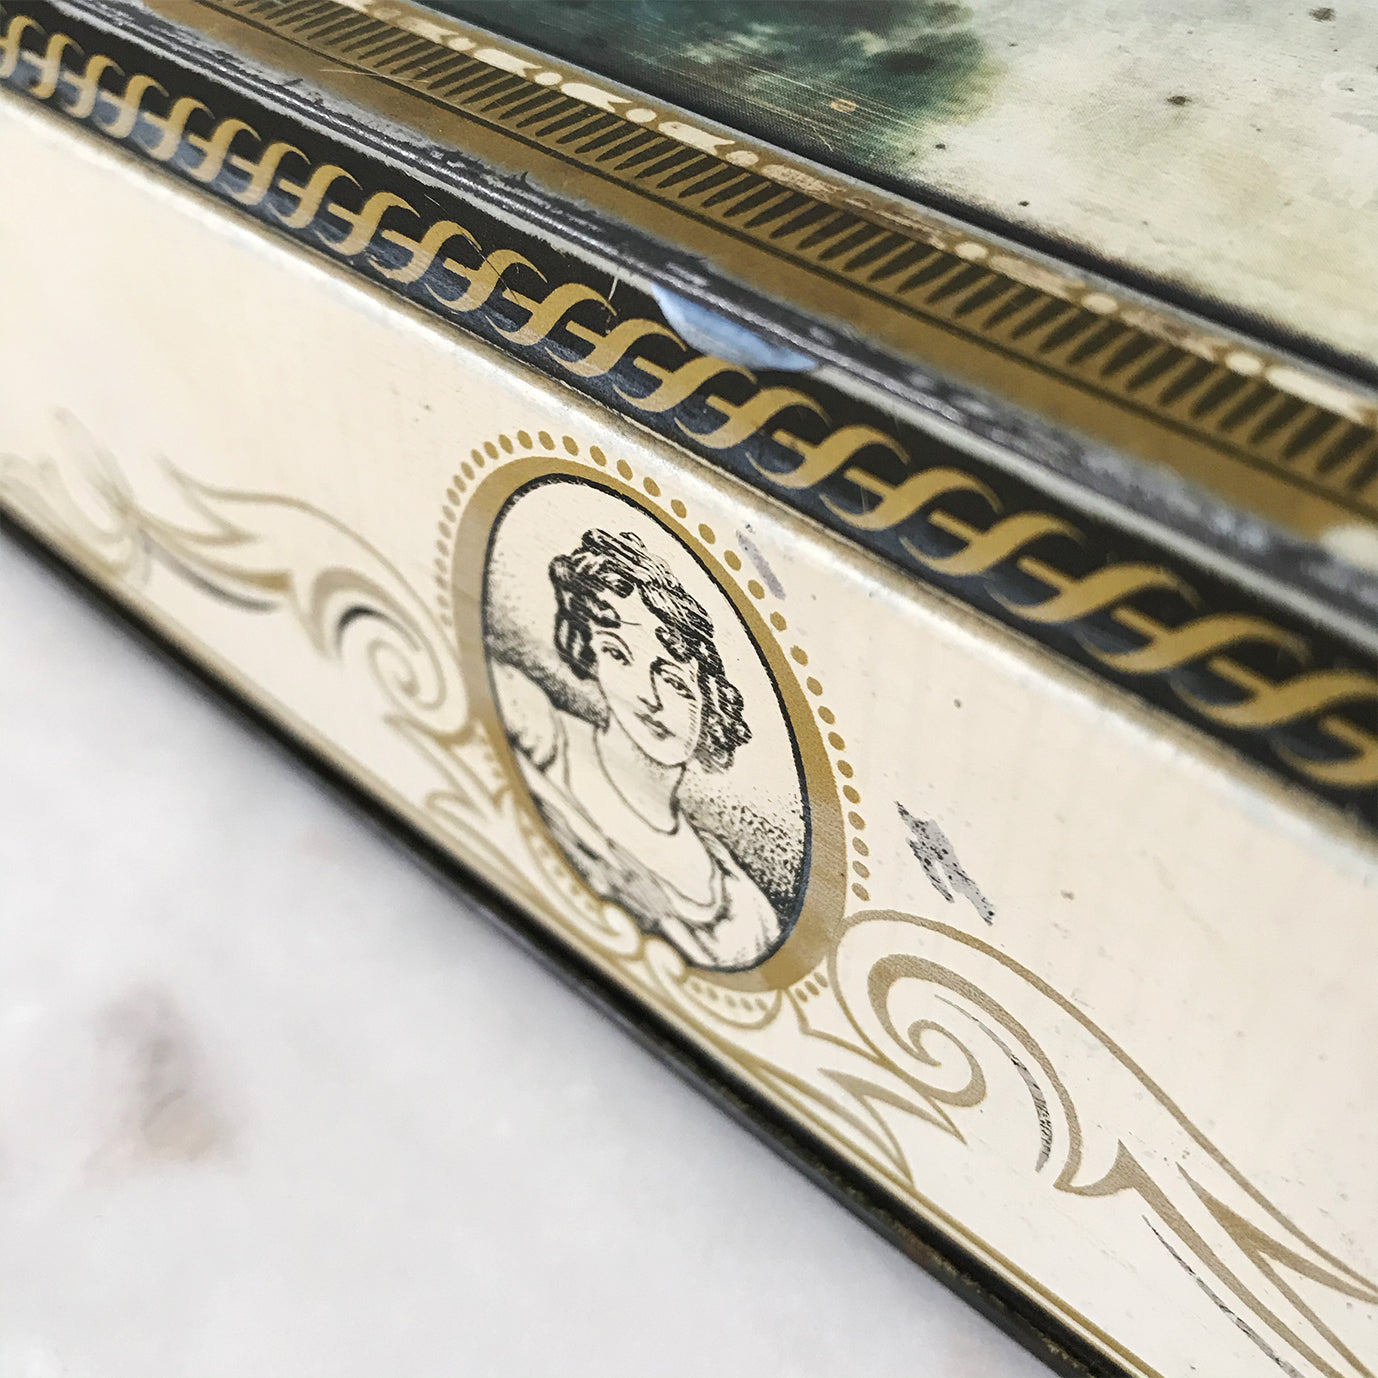 Vintage 1950s Peak Frean & Co Biscuit Tin with the Countess of Oxford after John Hoppner on the front. It has fab little line illustrations of the lady on the sides with classical gold framing and embellishments - SHOP NOW - www.intovintage.co.uk